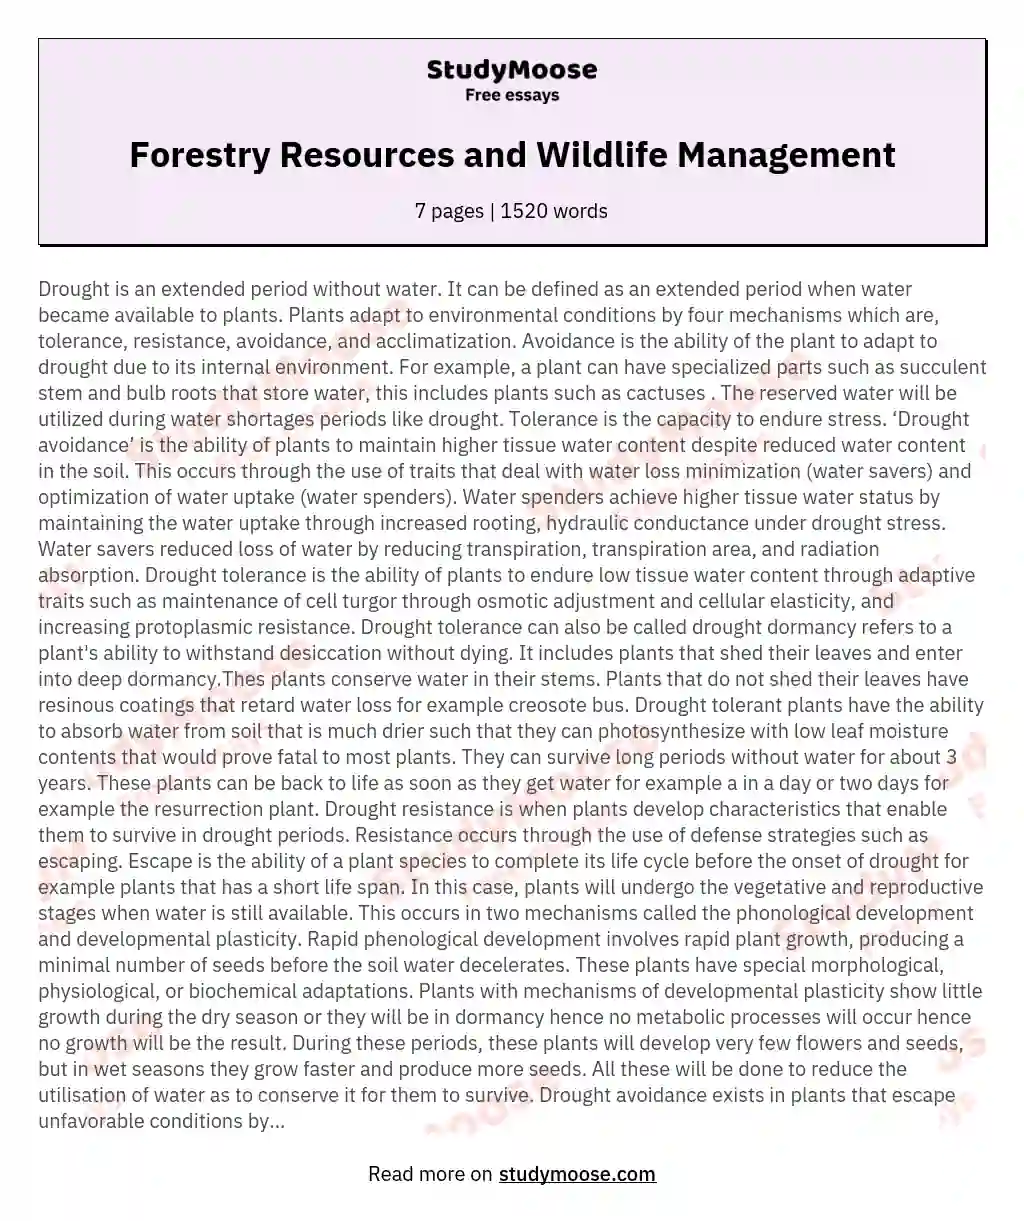 Forestry Resources and Wildlife Management essay